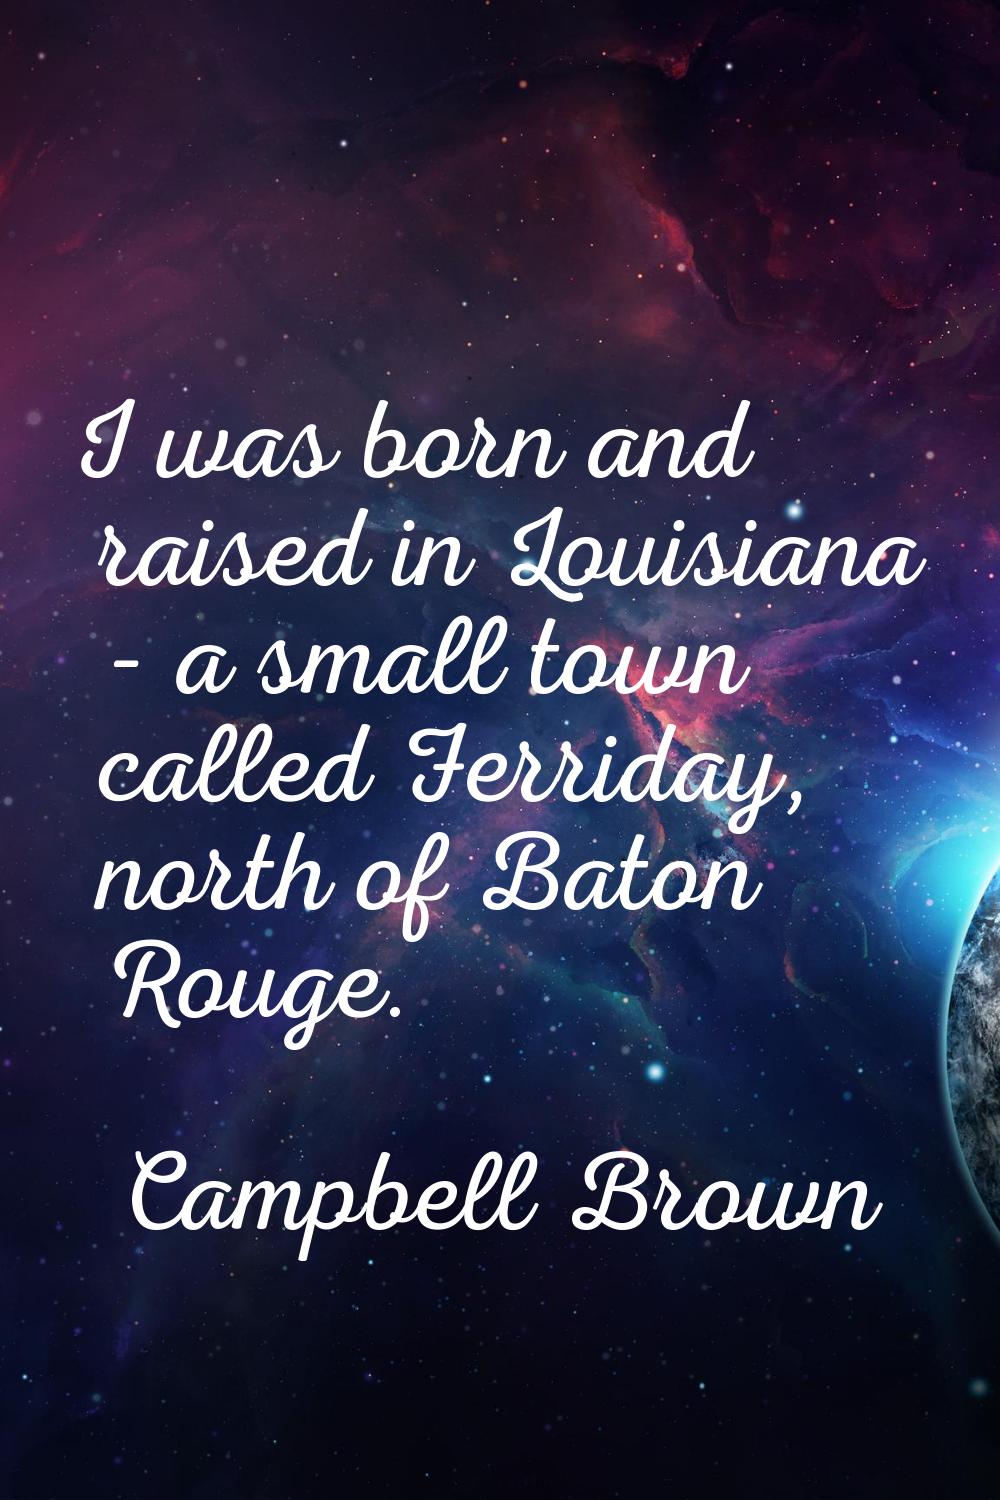 I was born and raised in Louisiana - a small town called Ferriday, north of Baton Rouge.